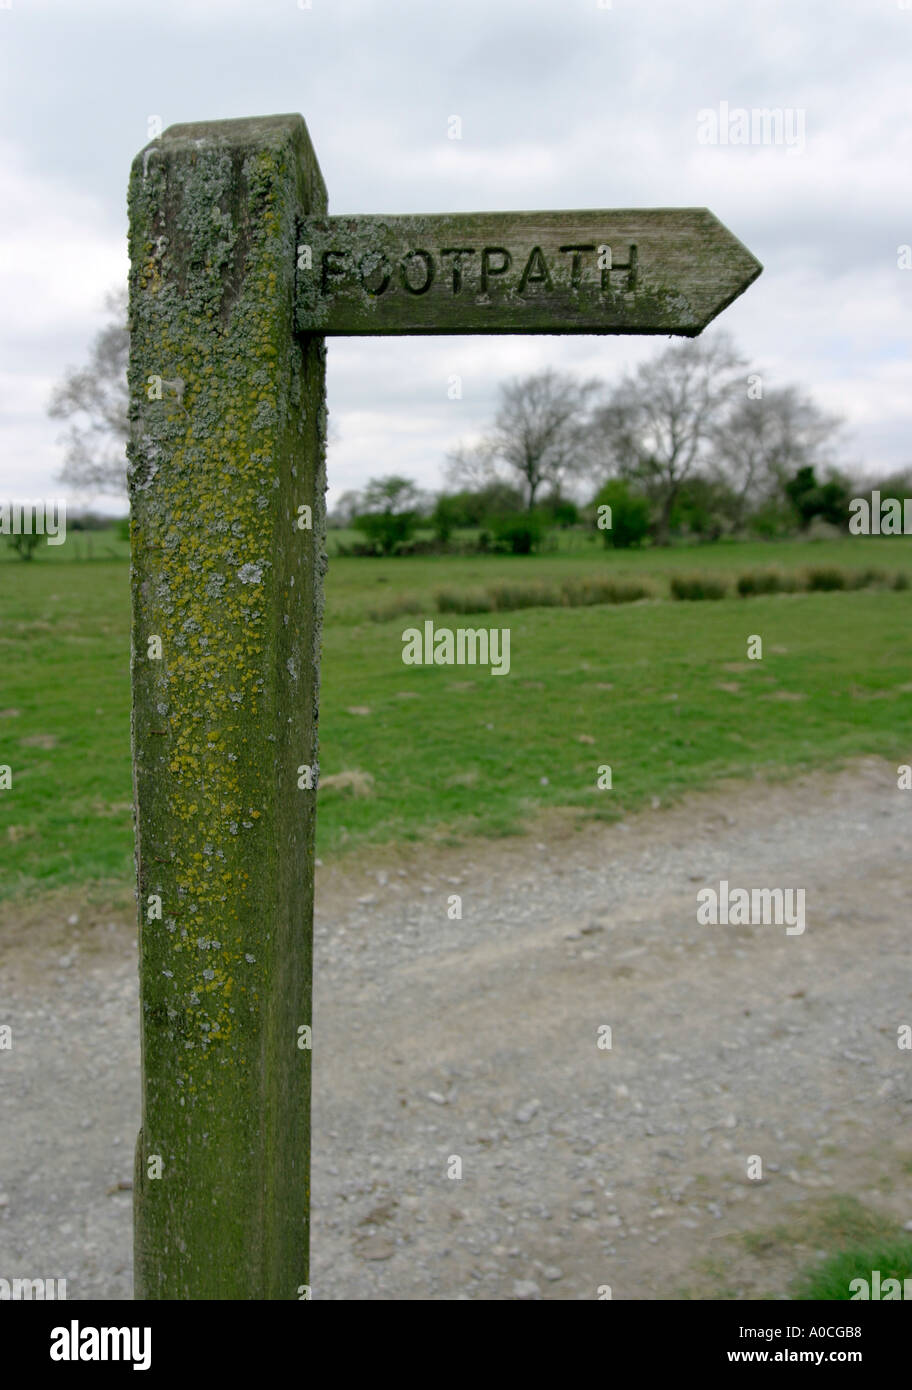 Public Footpath Sign covered in moss Stock Photo